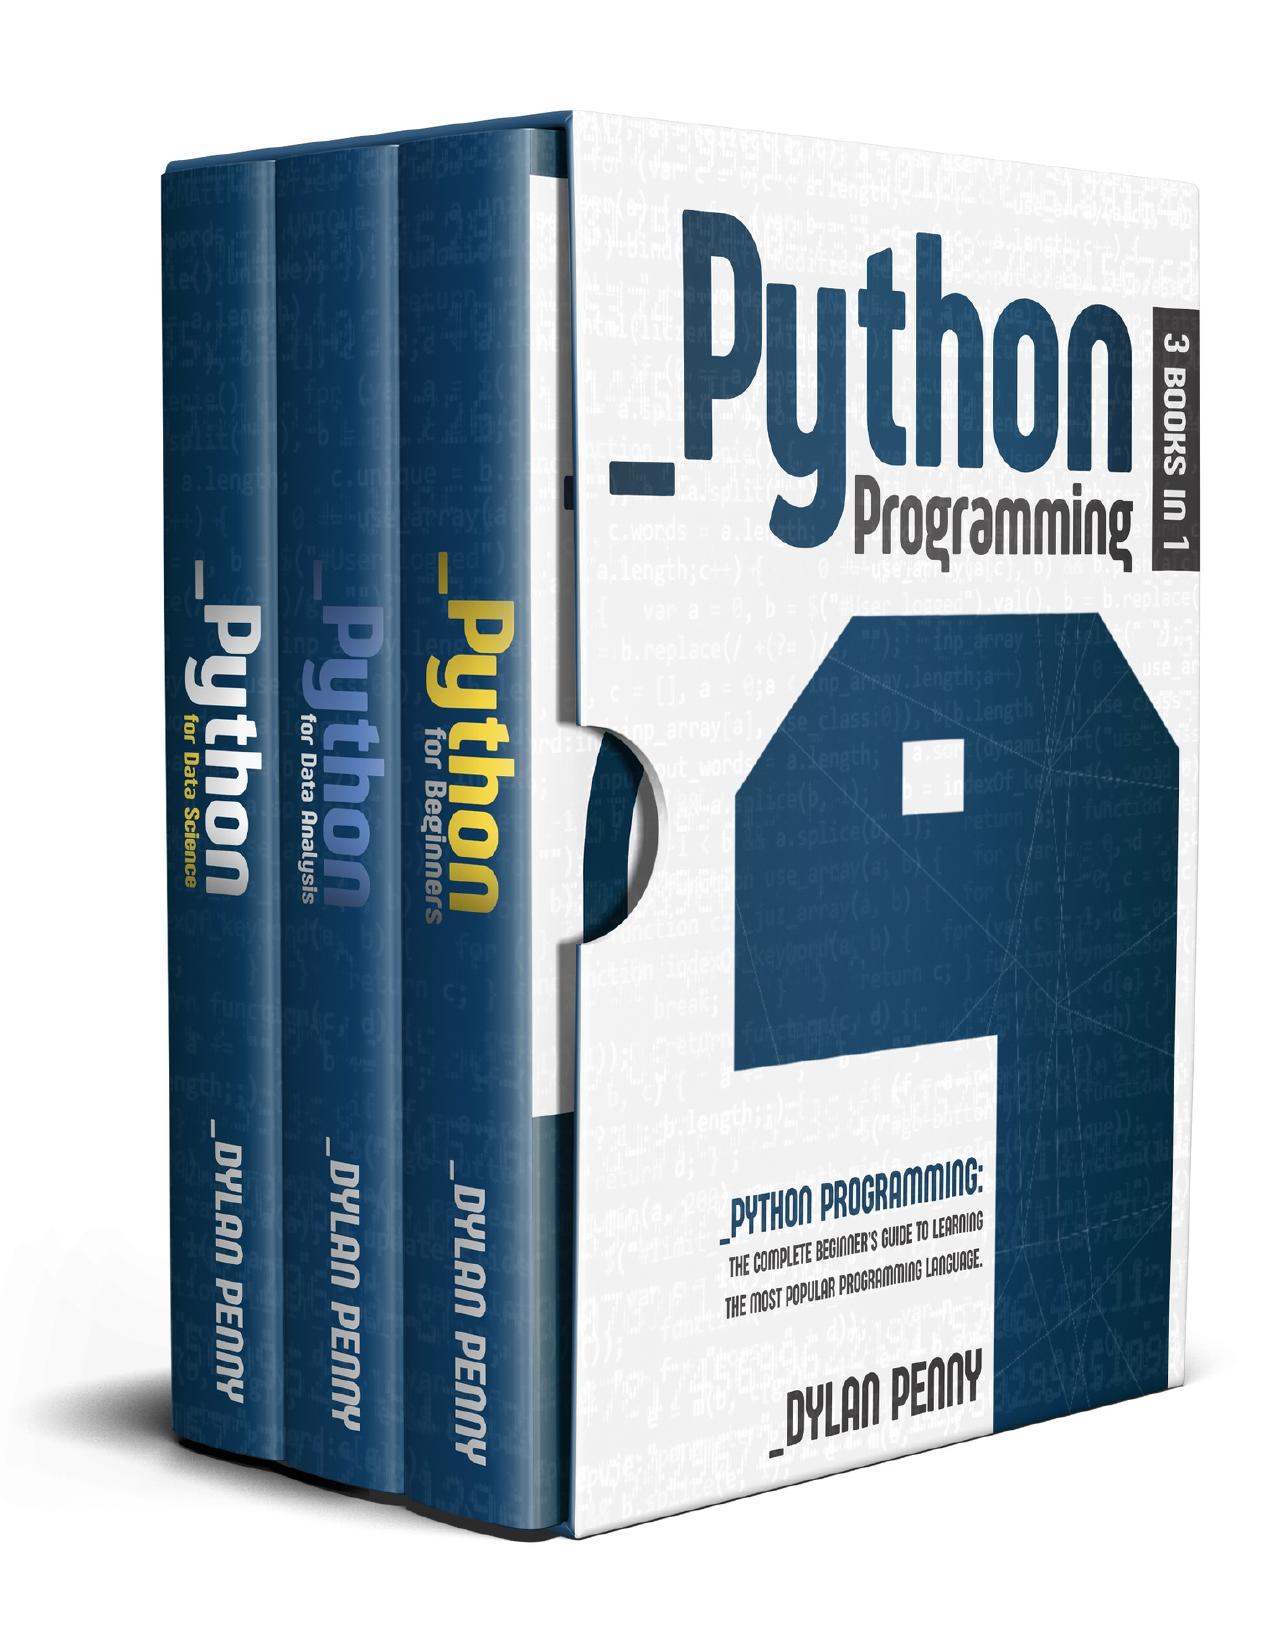 Python programming: 3 Books in 1: The Complete Beginner’s Guide to Learning the Most Popular Programming Language